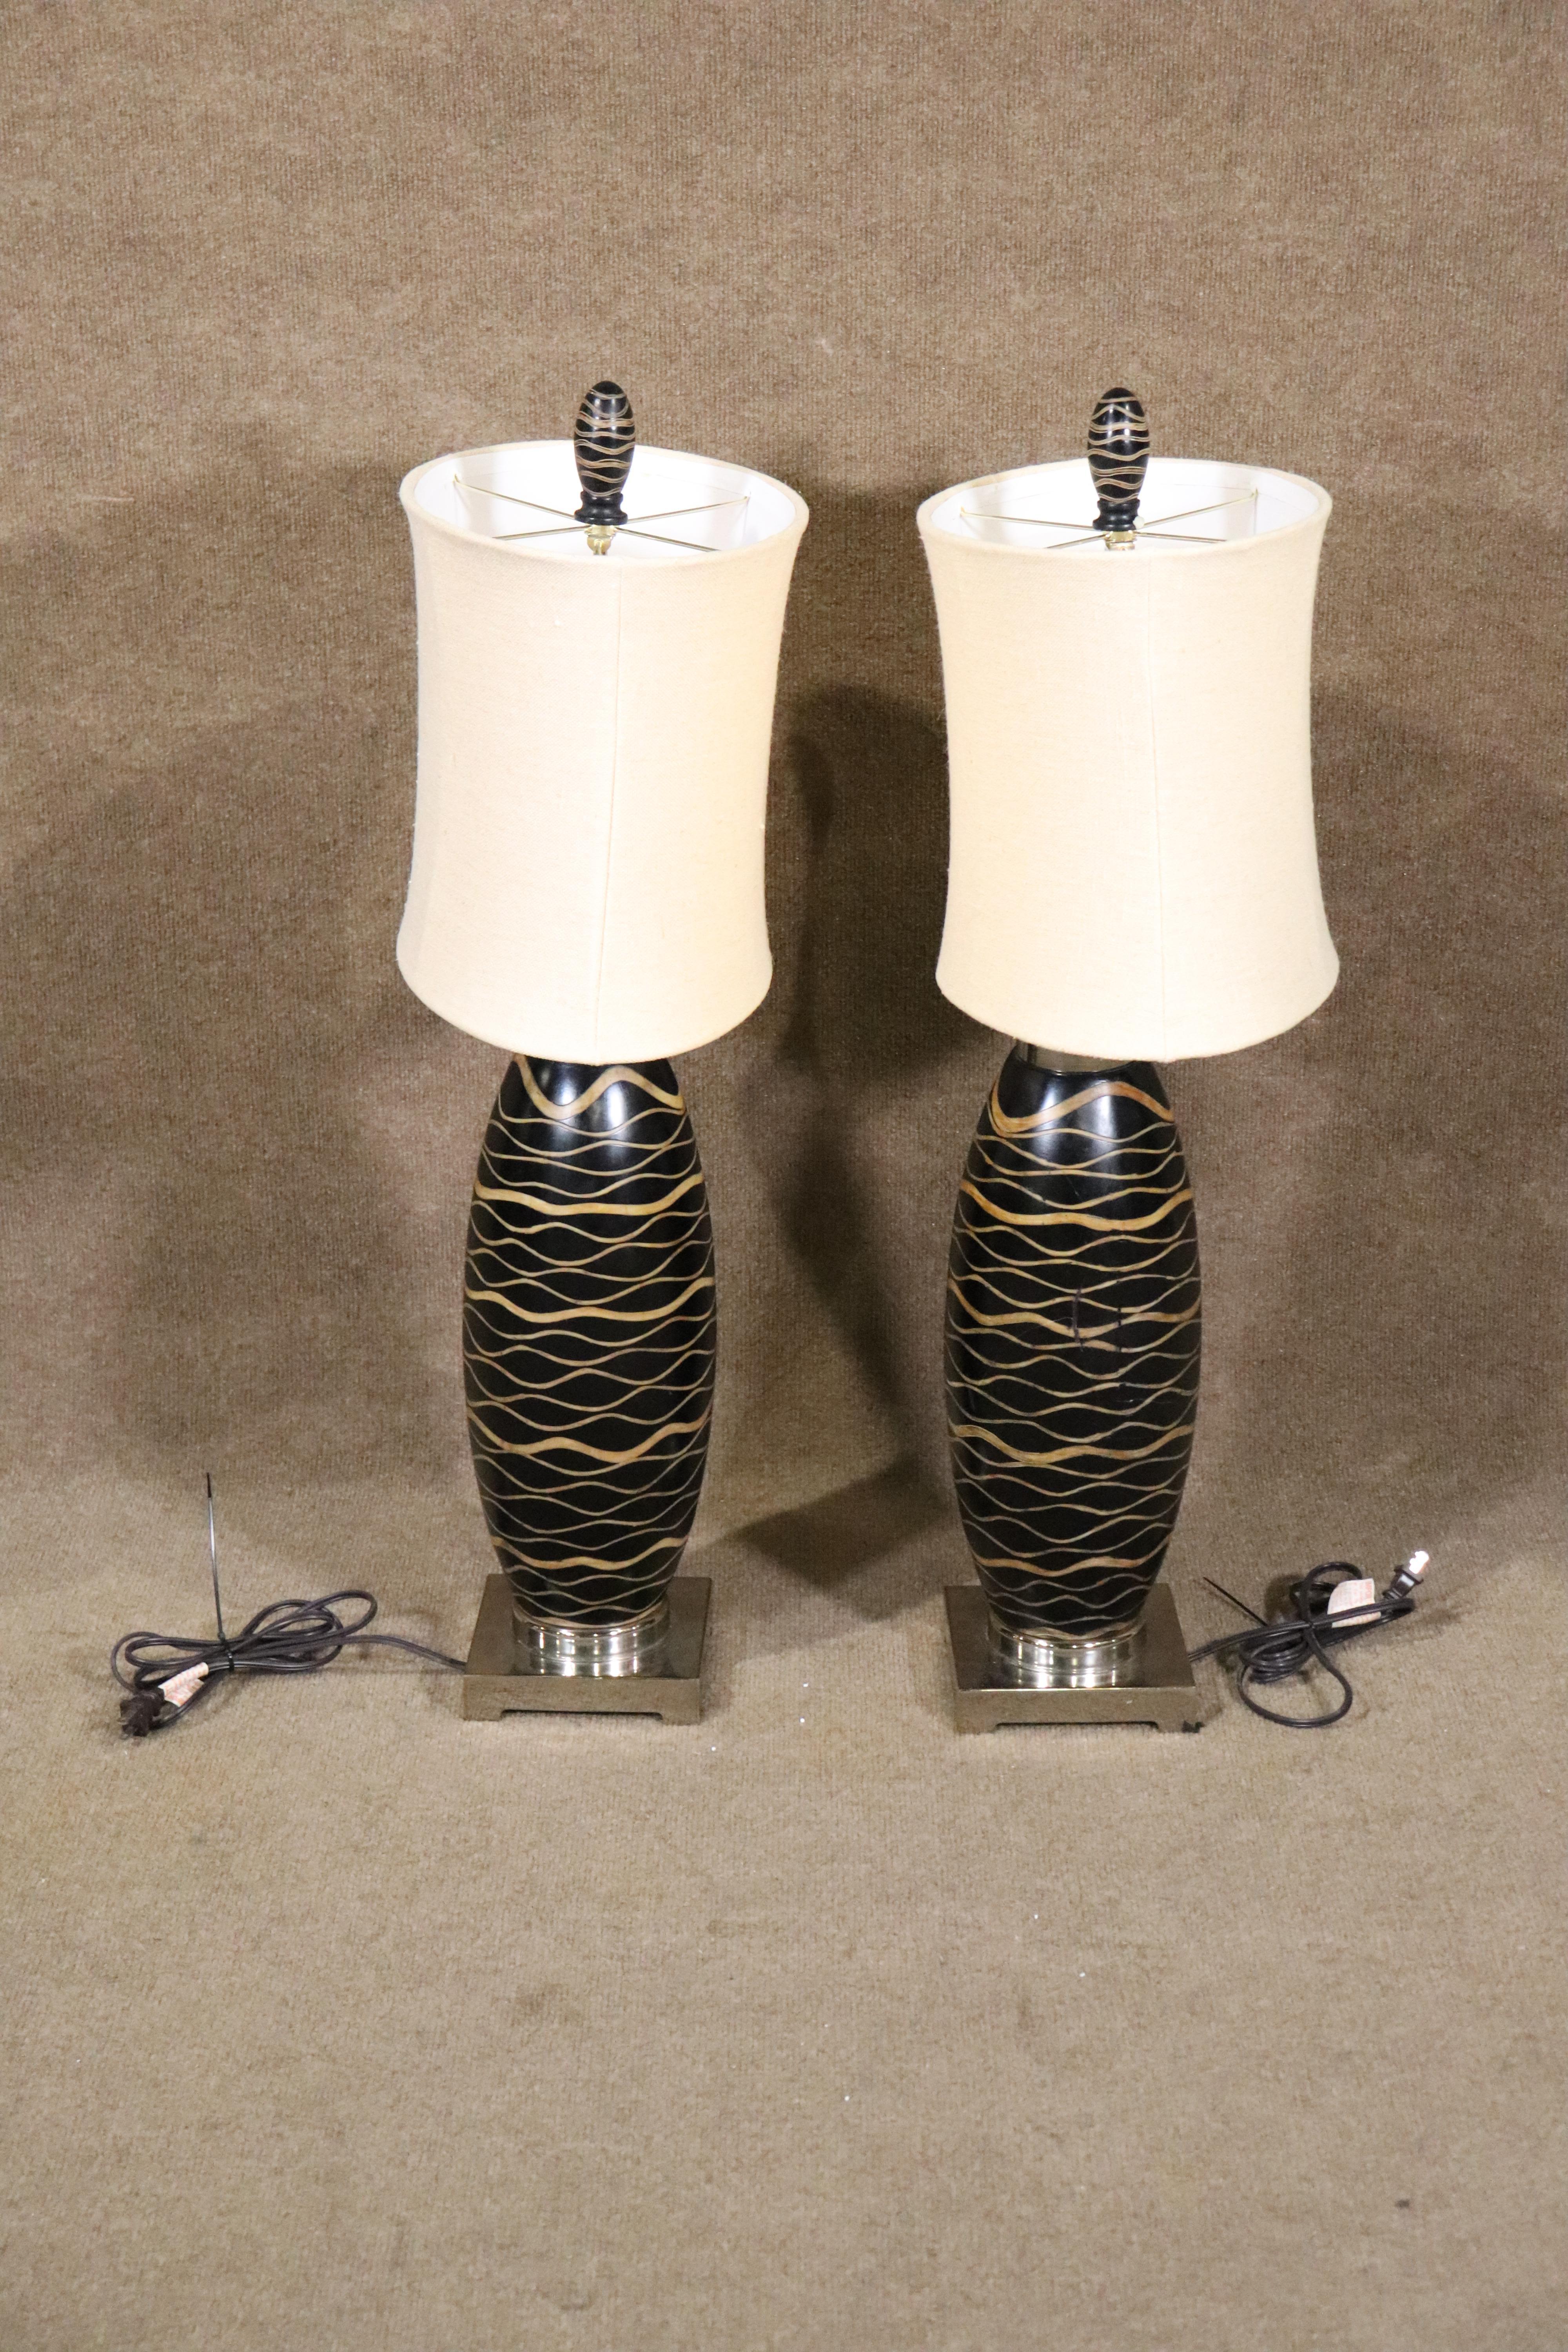 Pair of deco style table lamps with oval shades. Tiger wood motif around both lamps.
Please confirm item location NY or NJ.